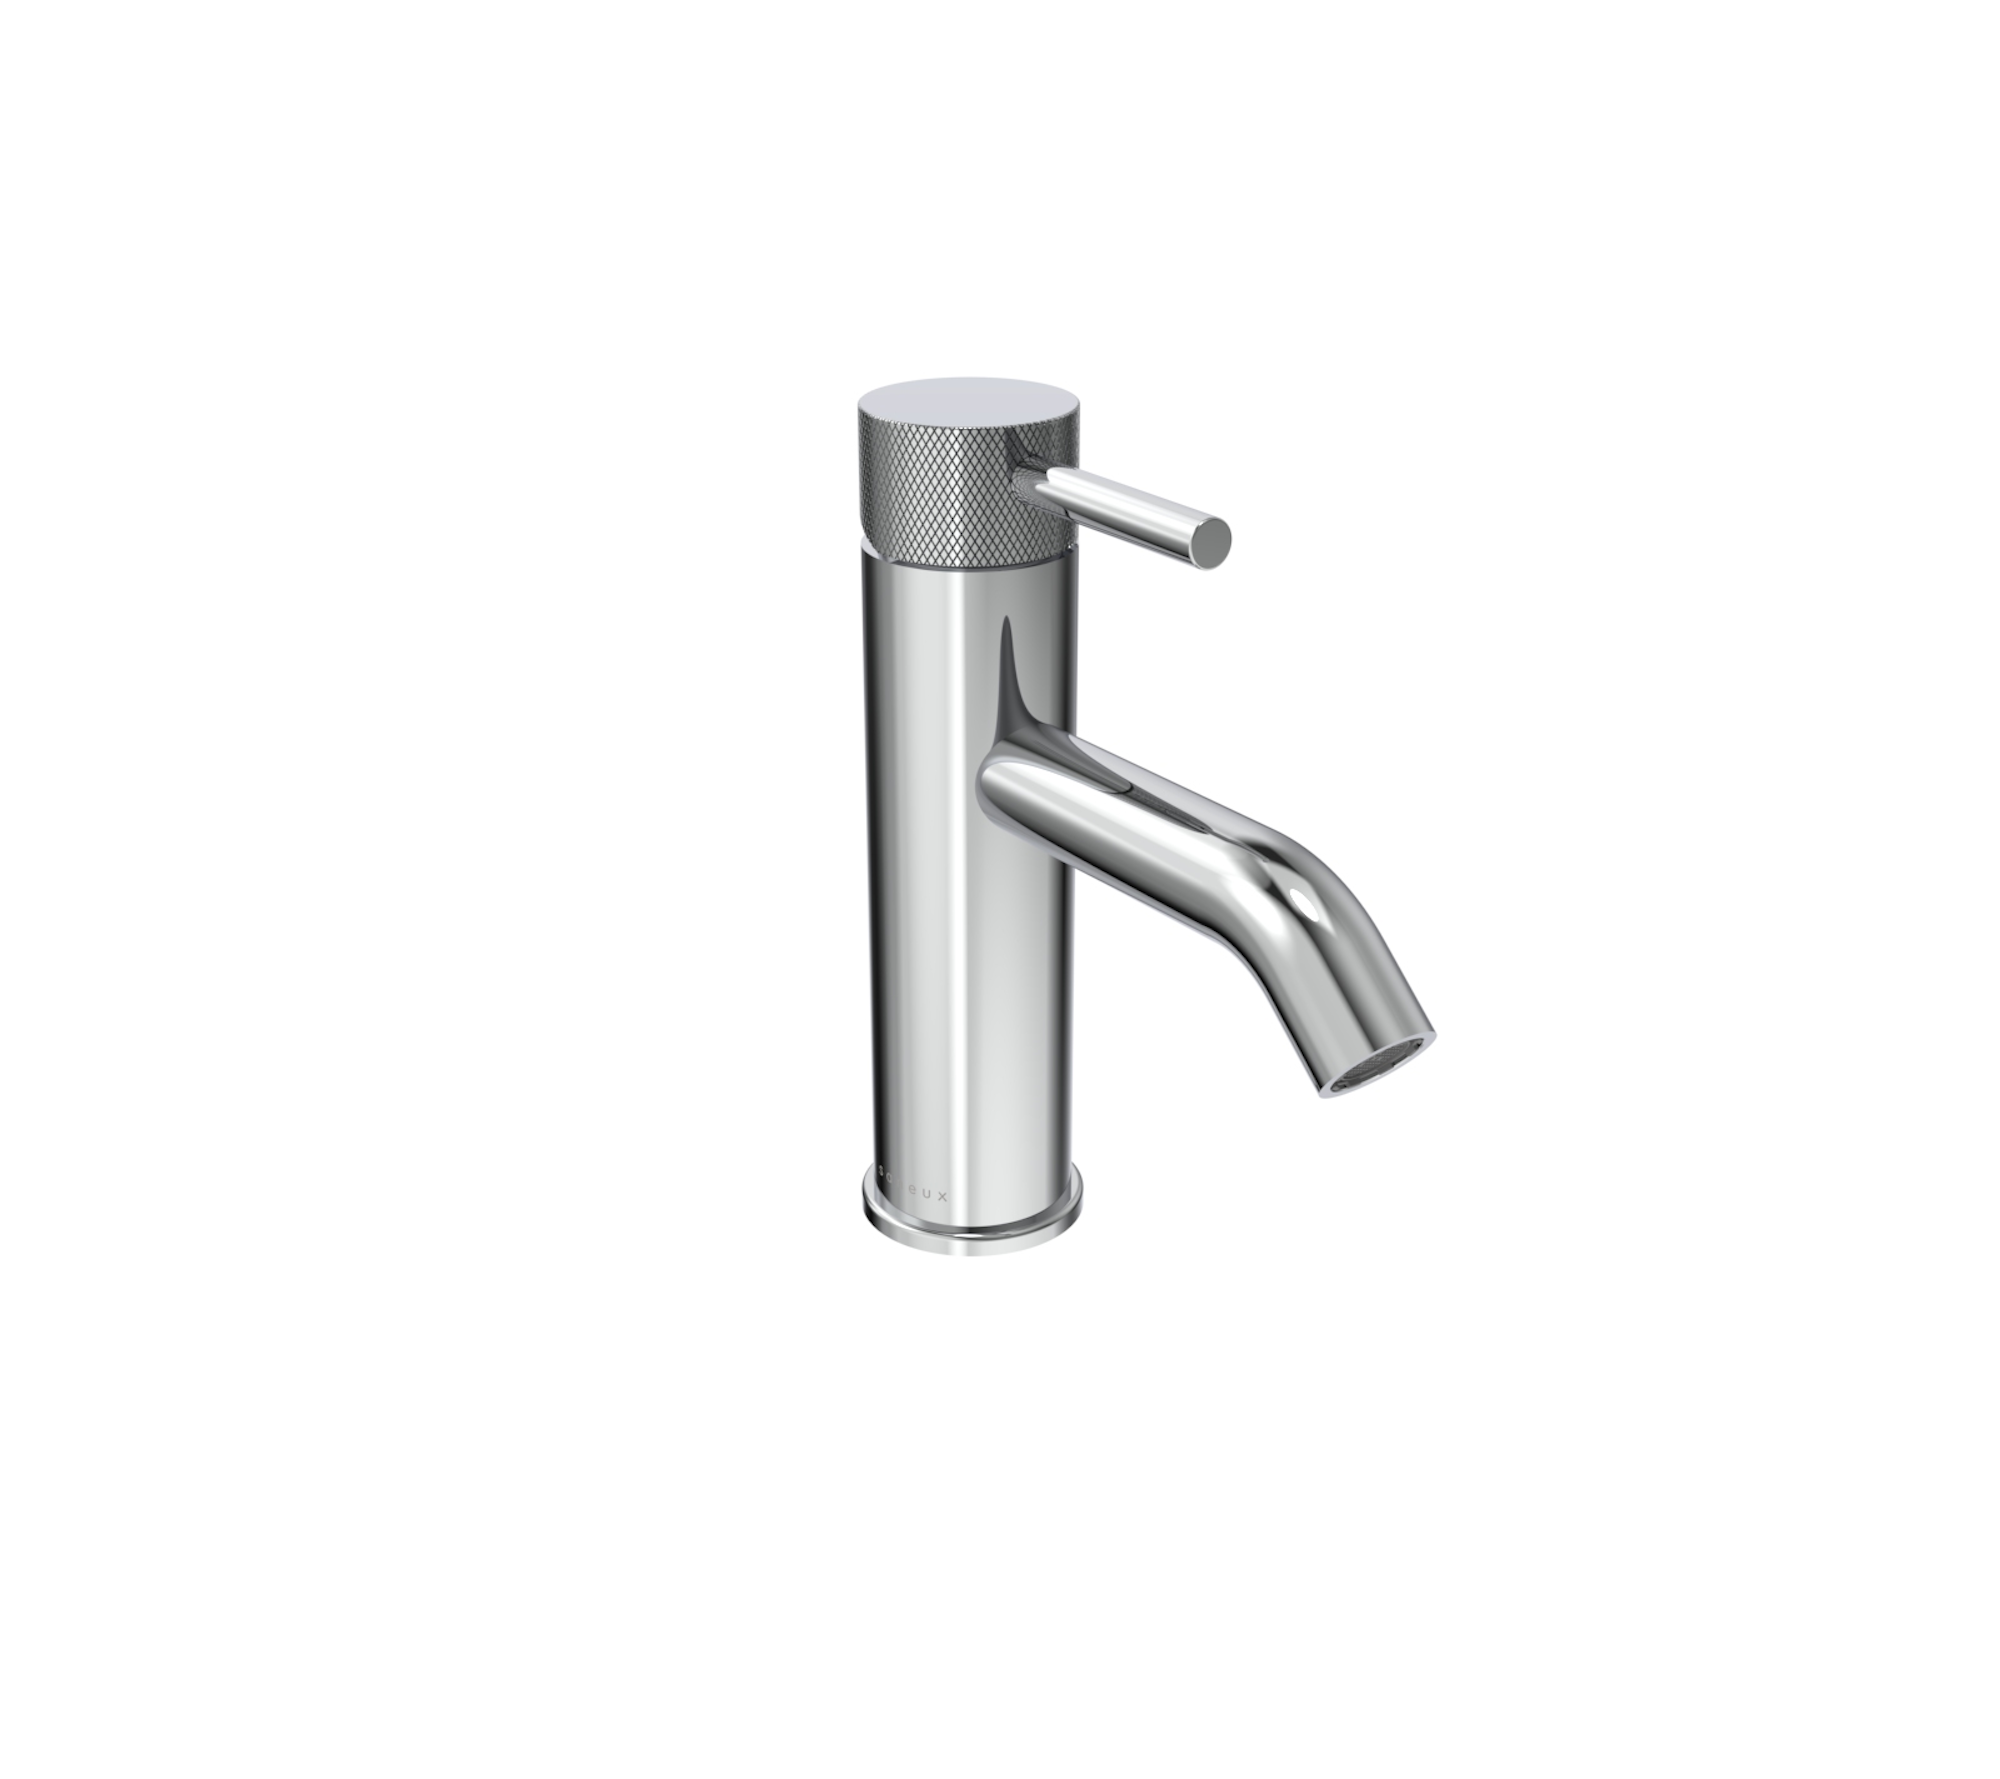 COS basin mixer with knurled handle - Chrome